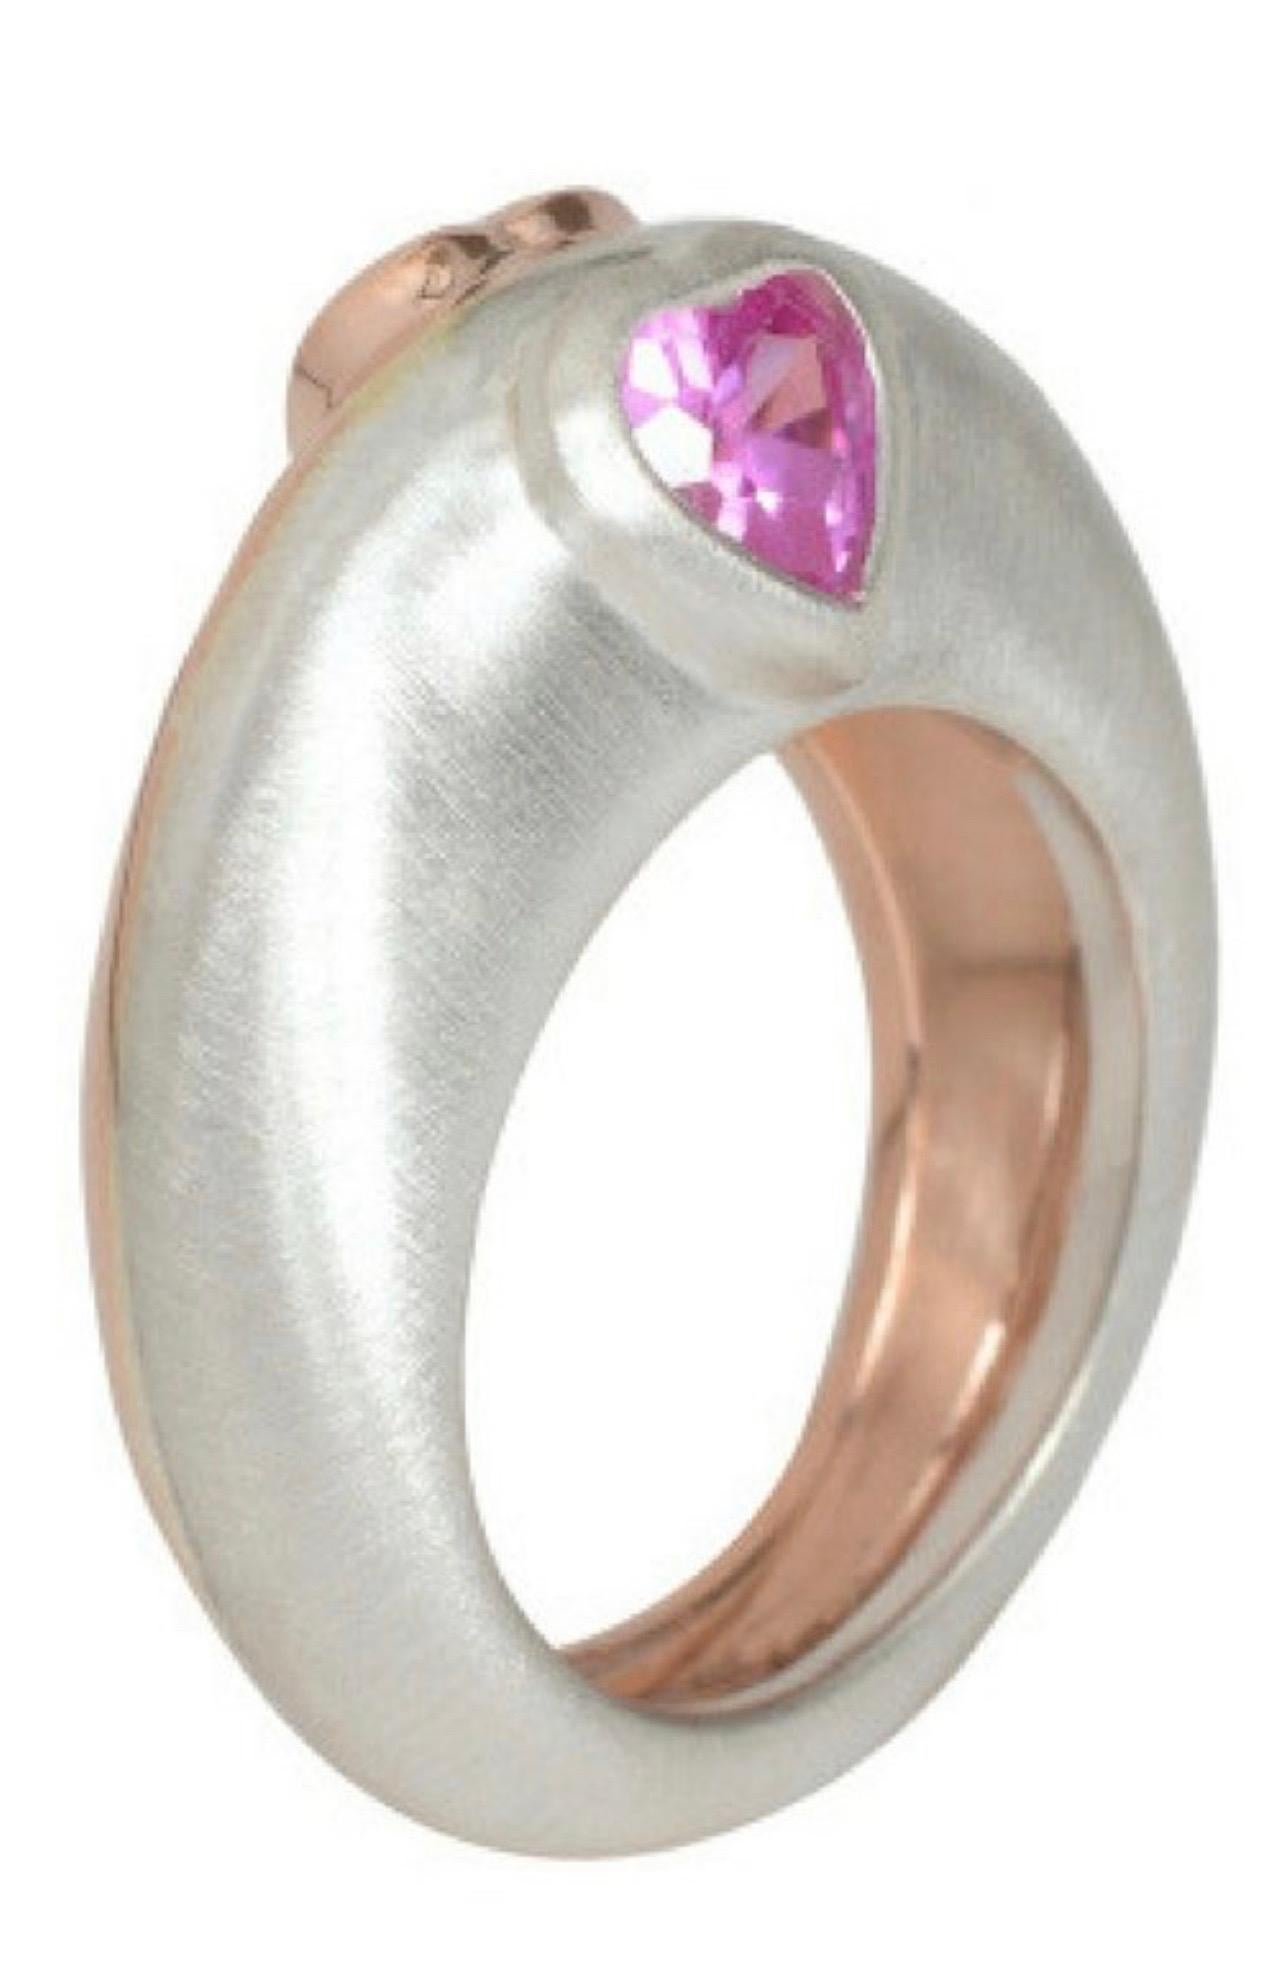 14k Pink Gold and Silver Ring with two sapphire hearts approximate 1 tct. Handset gems

Cost as Shown - Available:
Silver and 14k or 18k Yellow, White, or Pink Gold
3-5 Week Delivery